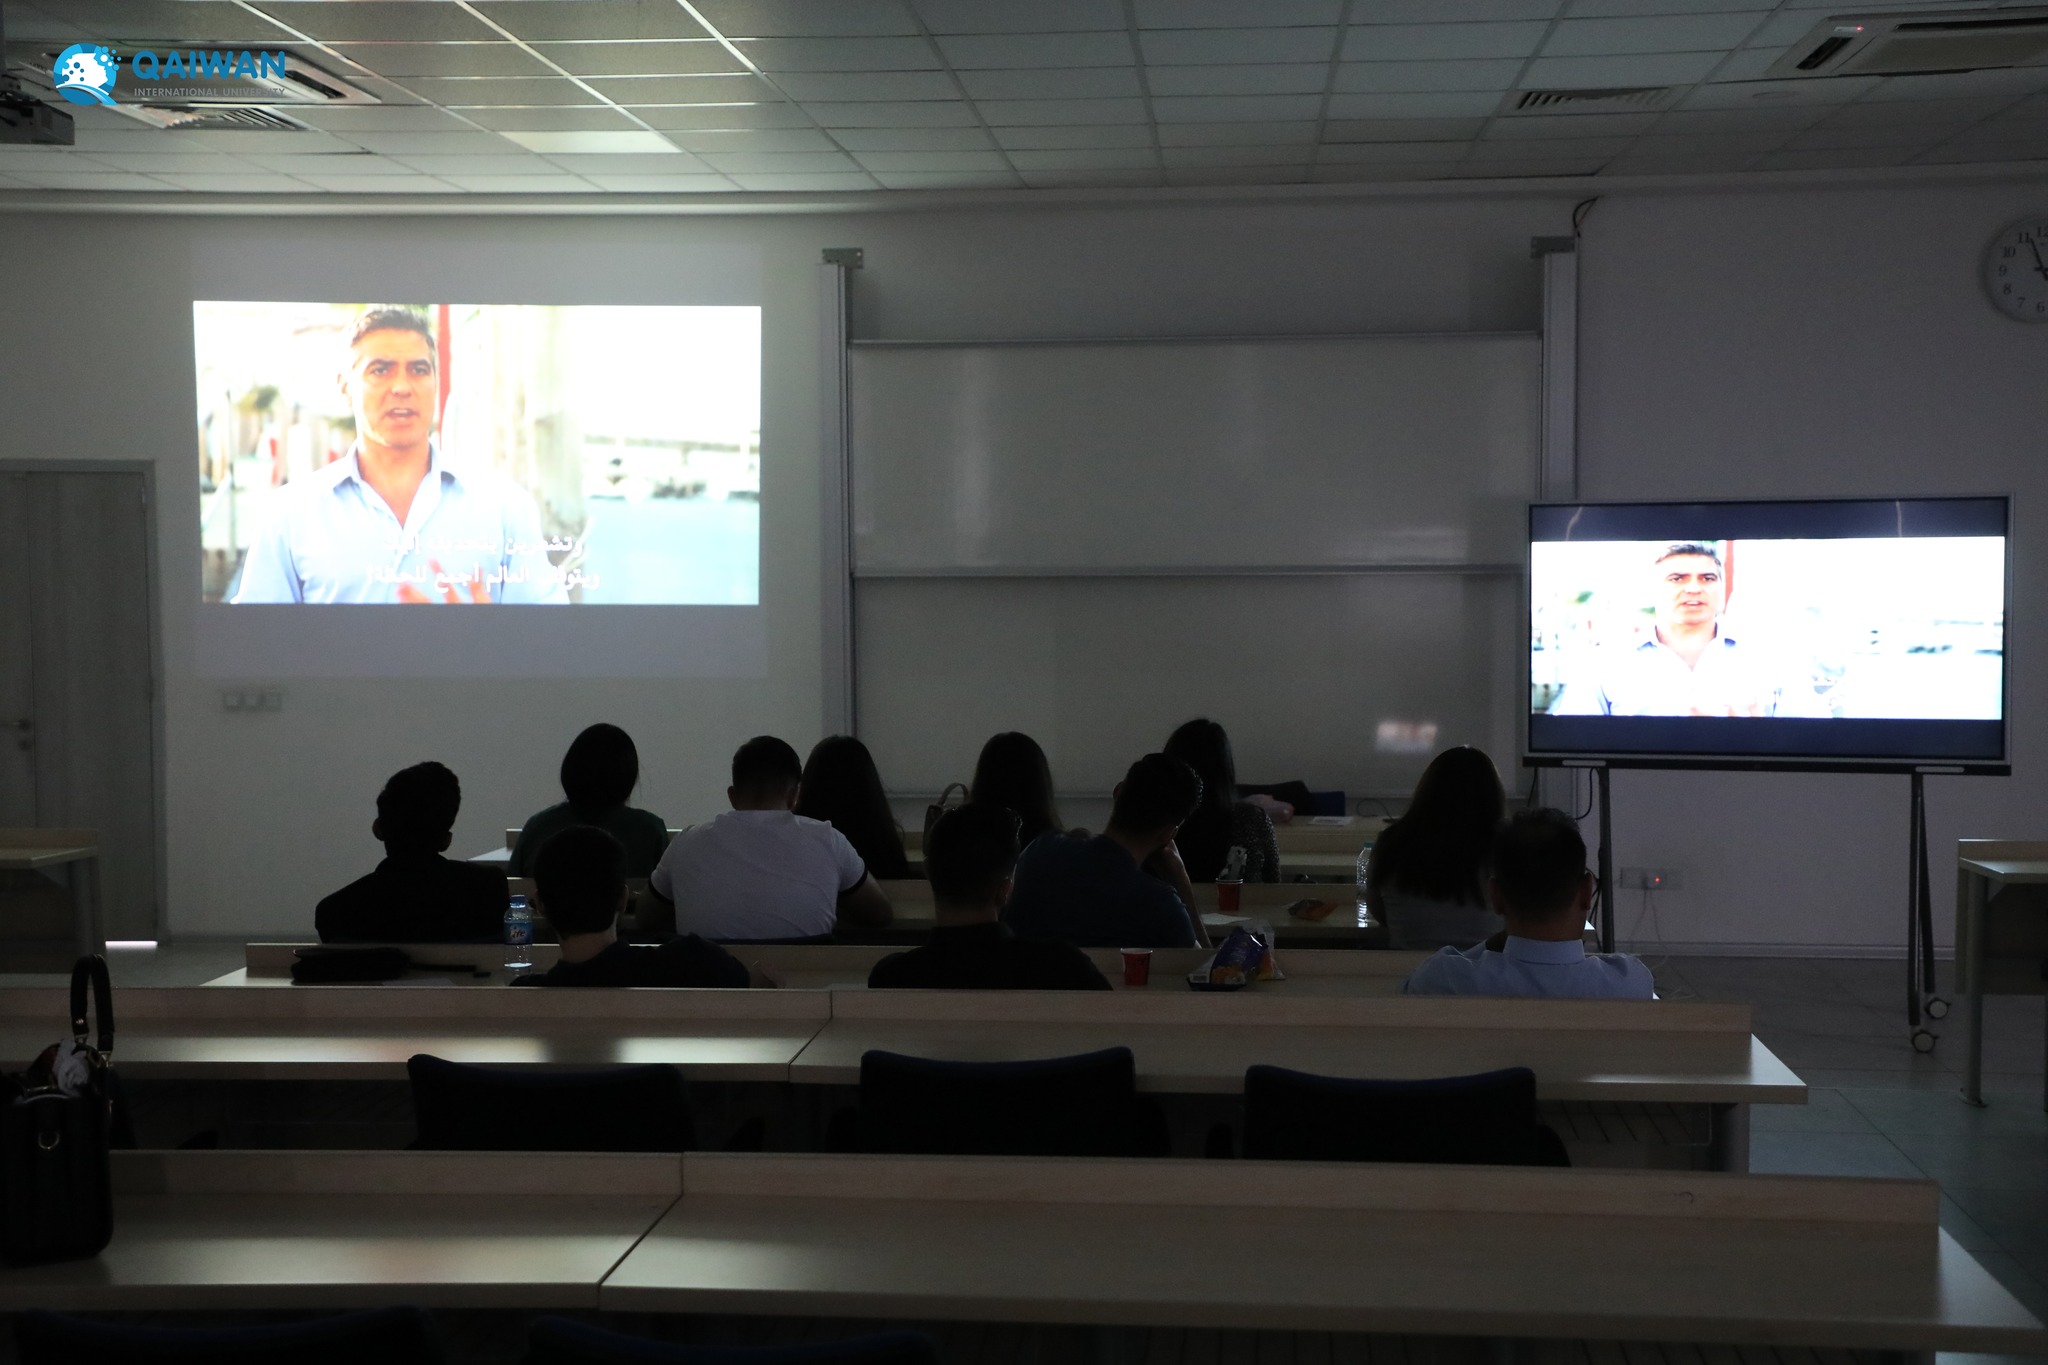 Students of Human Resources Development Department analyzed a film, applying HR principles to real-world scenarios